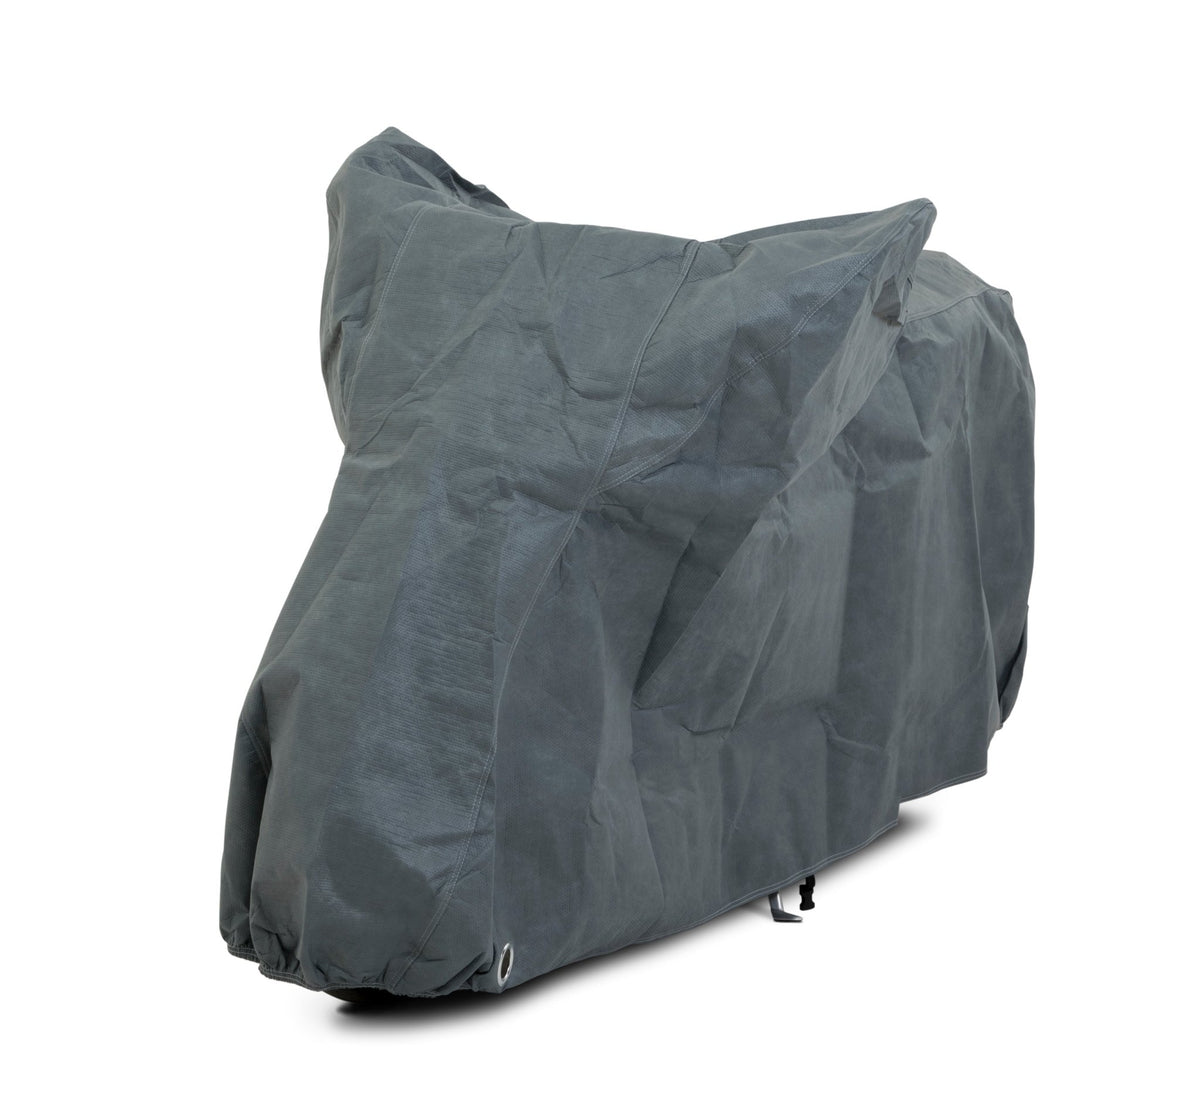 Stormforce best outdoor motorcycle covers for HONDA - Storm Motorcycle Covers